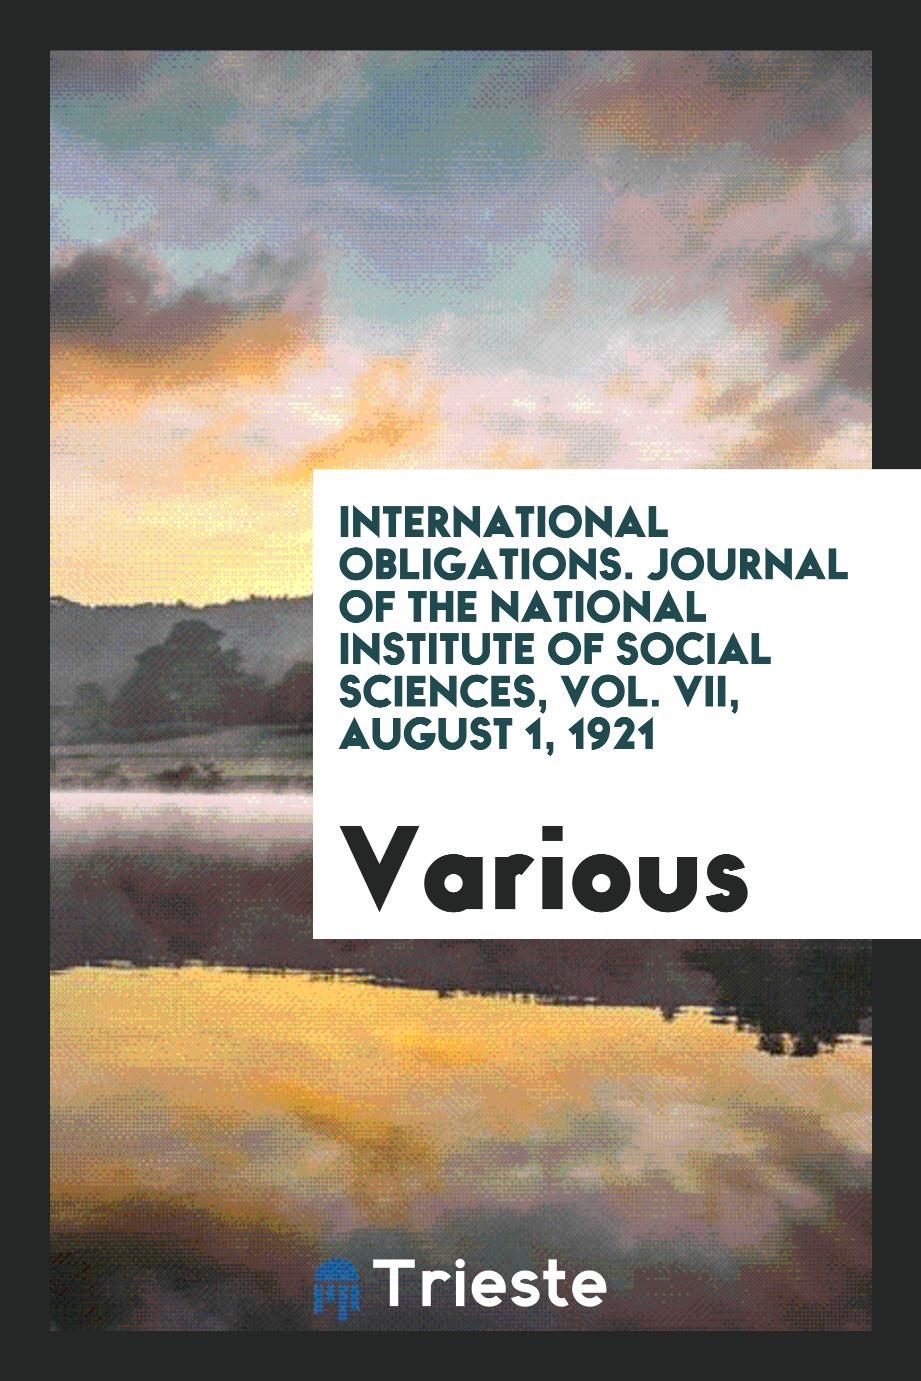 International obligations. Journal of the National Institute of Social Sciences, Vol. VII, August 1, 1921